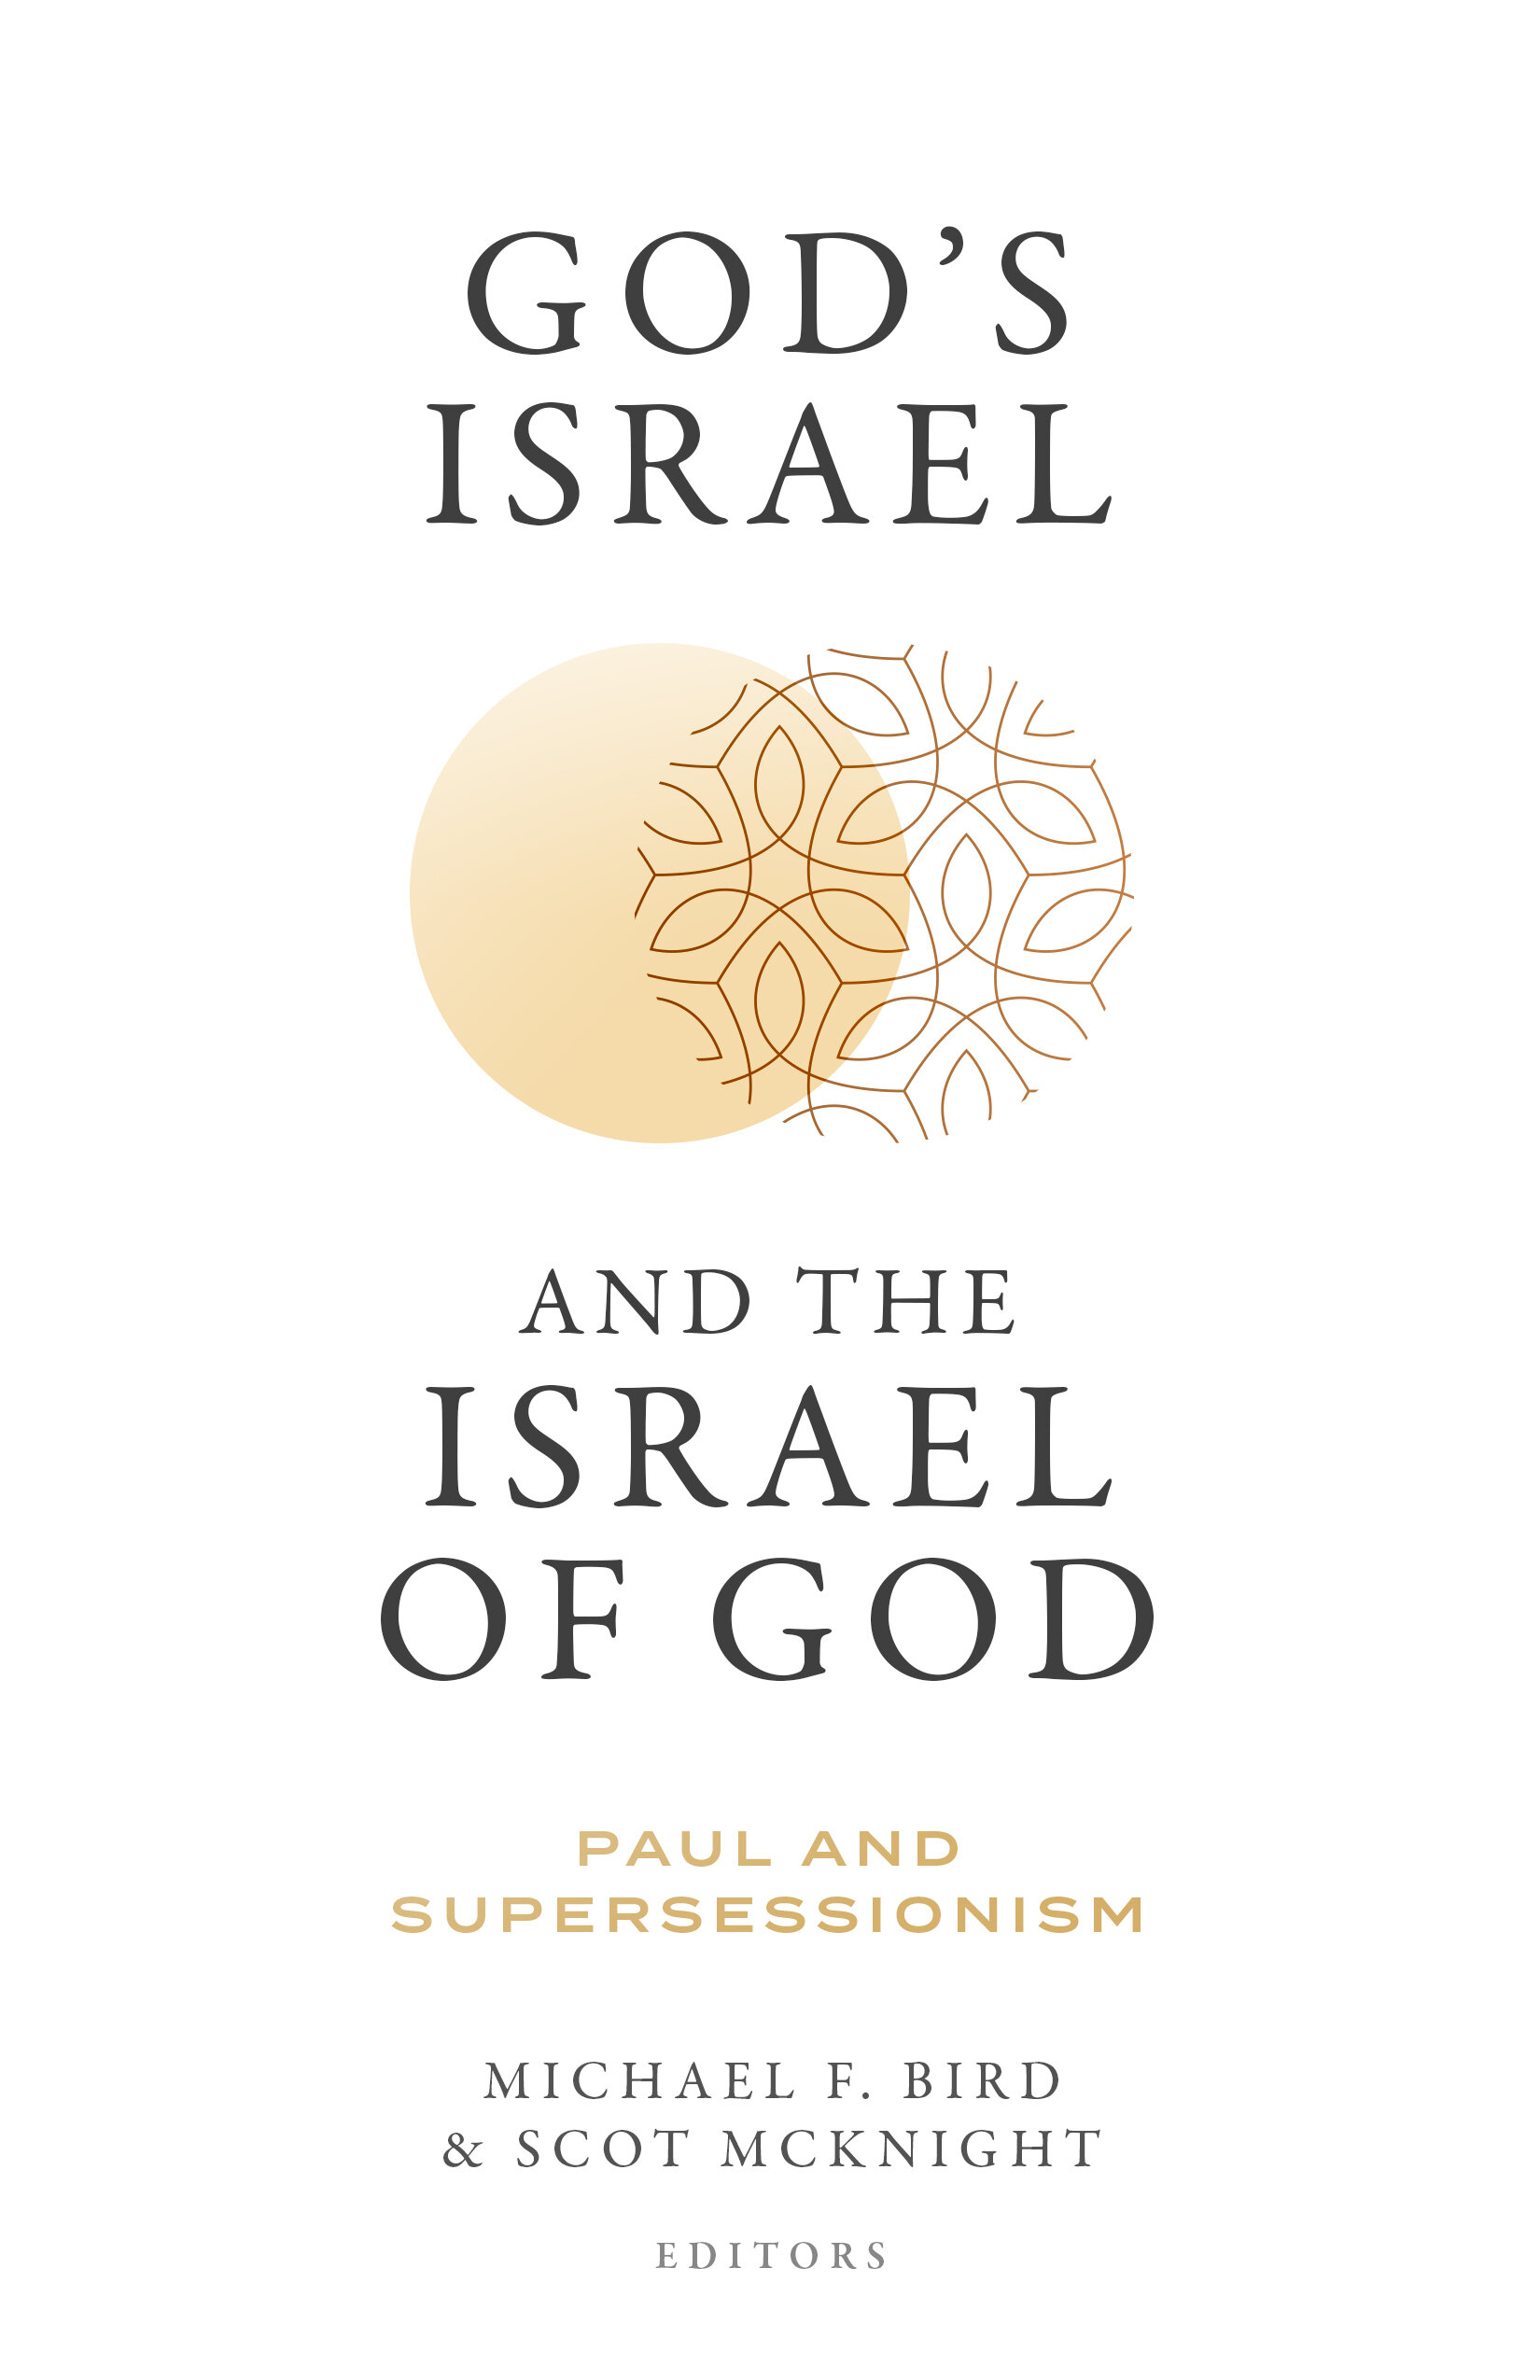 God’s Israel and the Israel of God